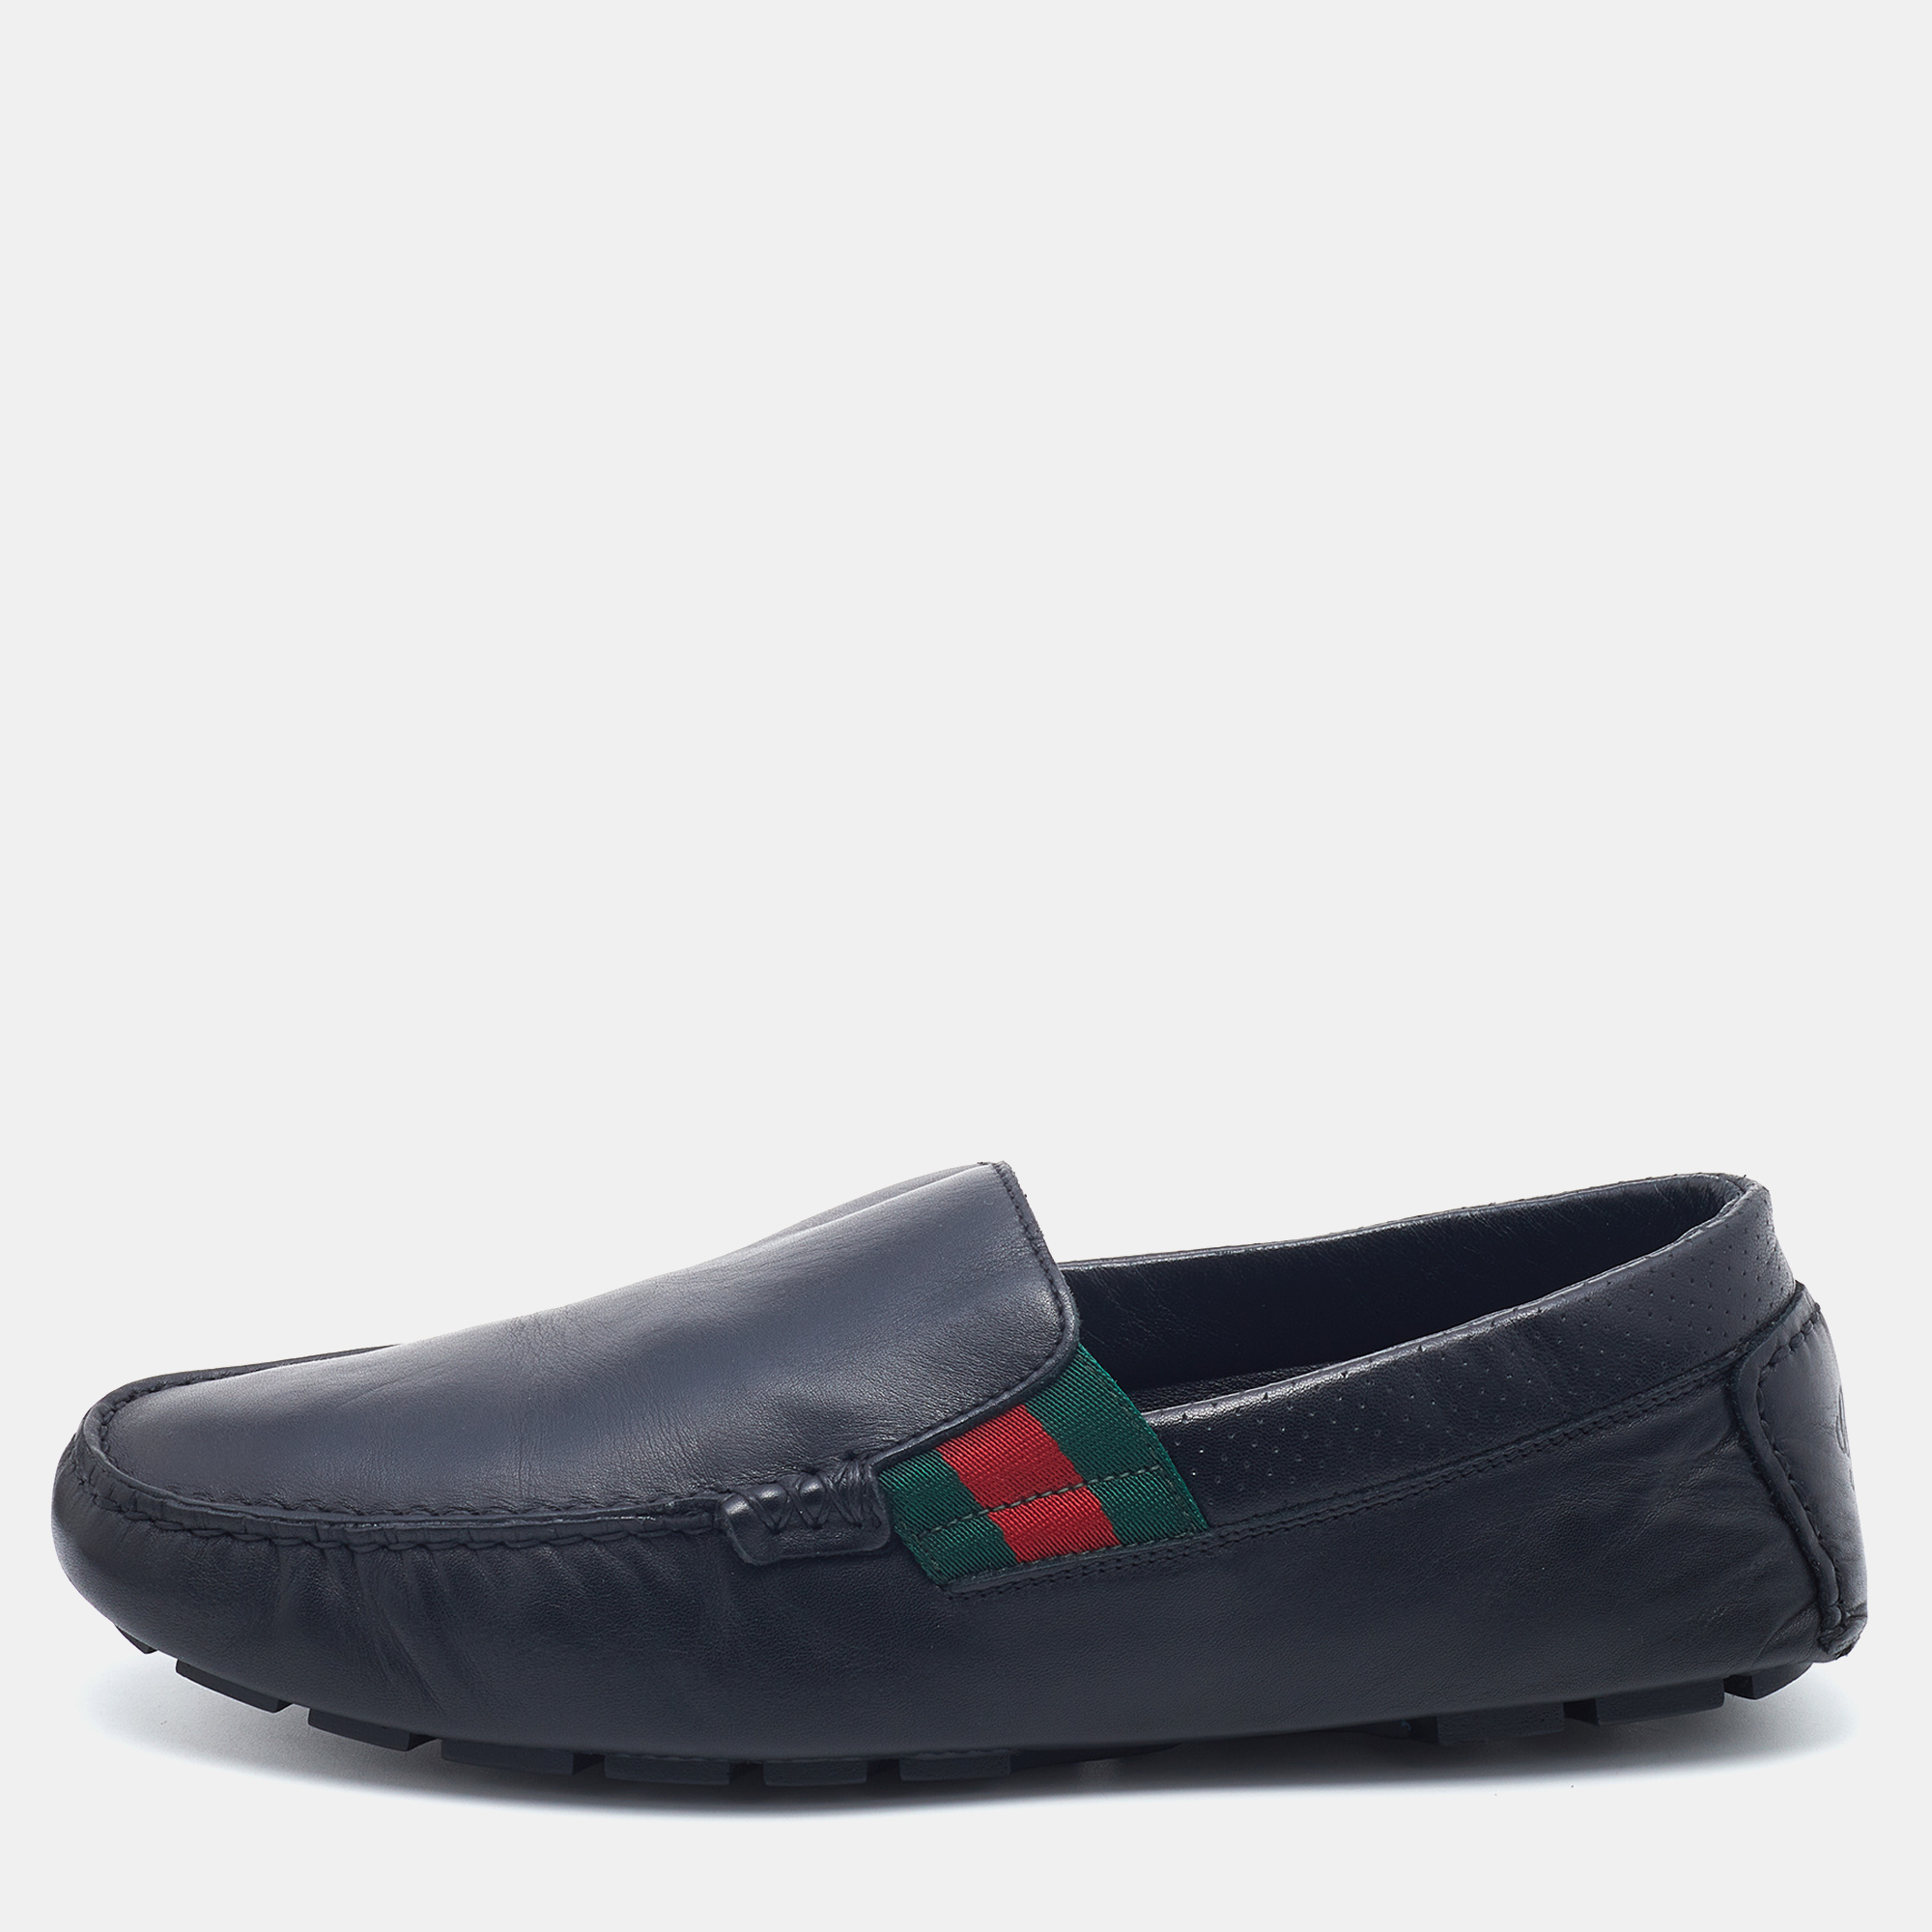 

Gucci Black Leather Web Slip On Loafers Size